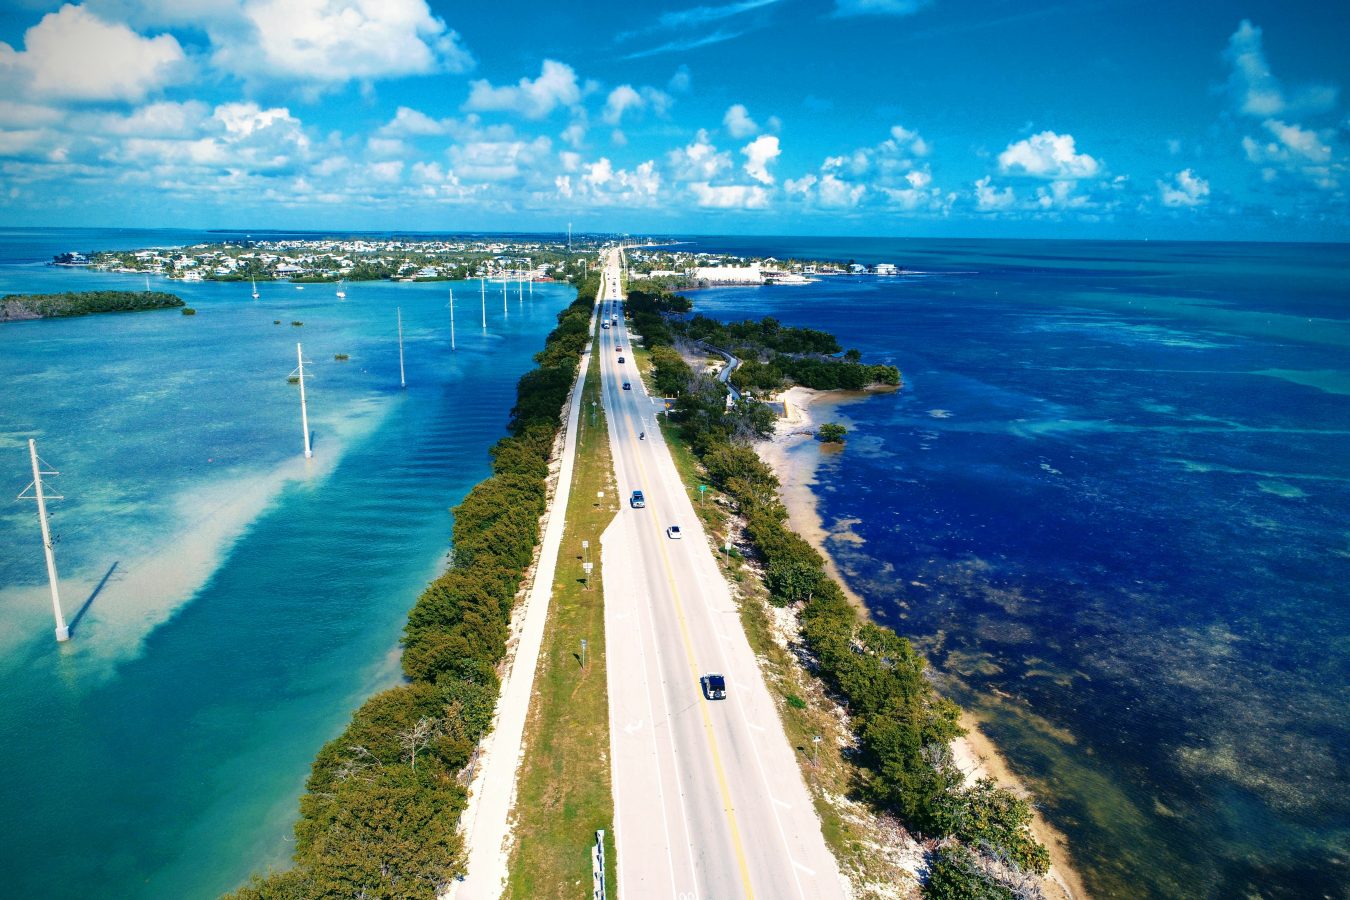 Aerial view of famous bridges and islands on the way to Key West, Florida Keys, United States.